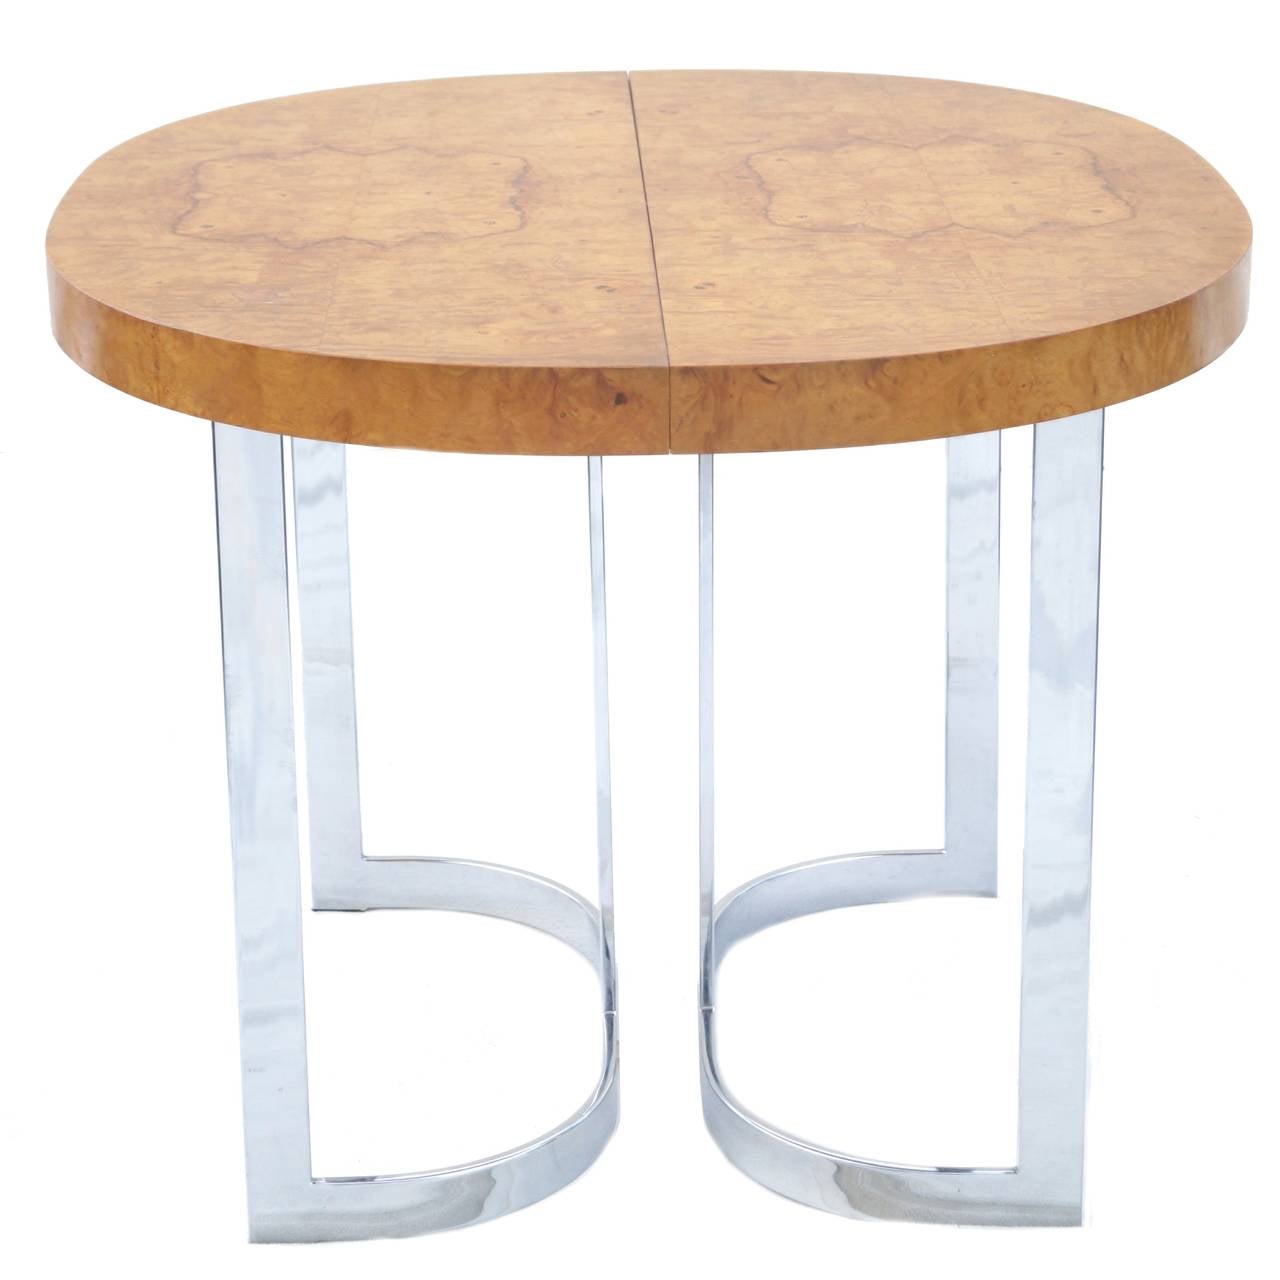 Unusual burl wood chrome dining table for small spaces two leaves. At just 36.25